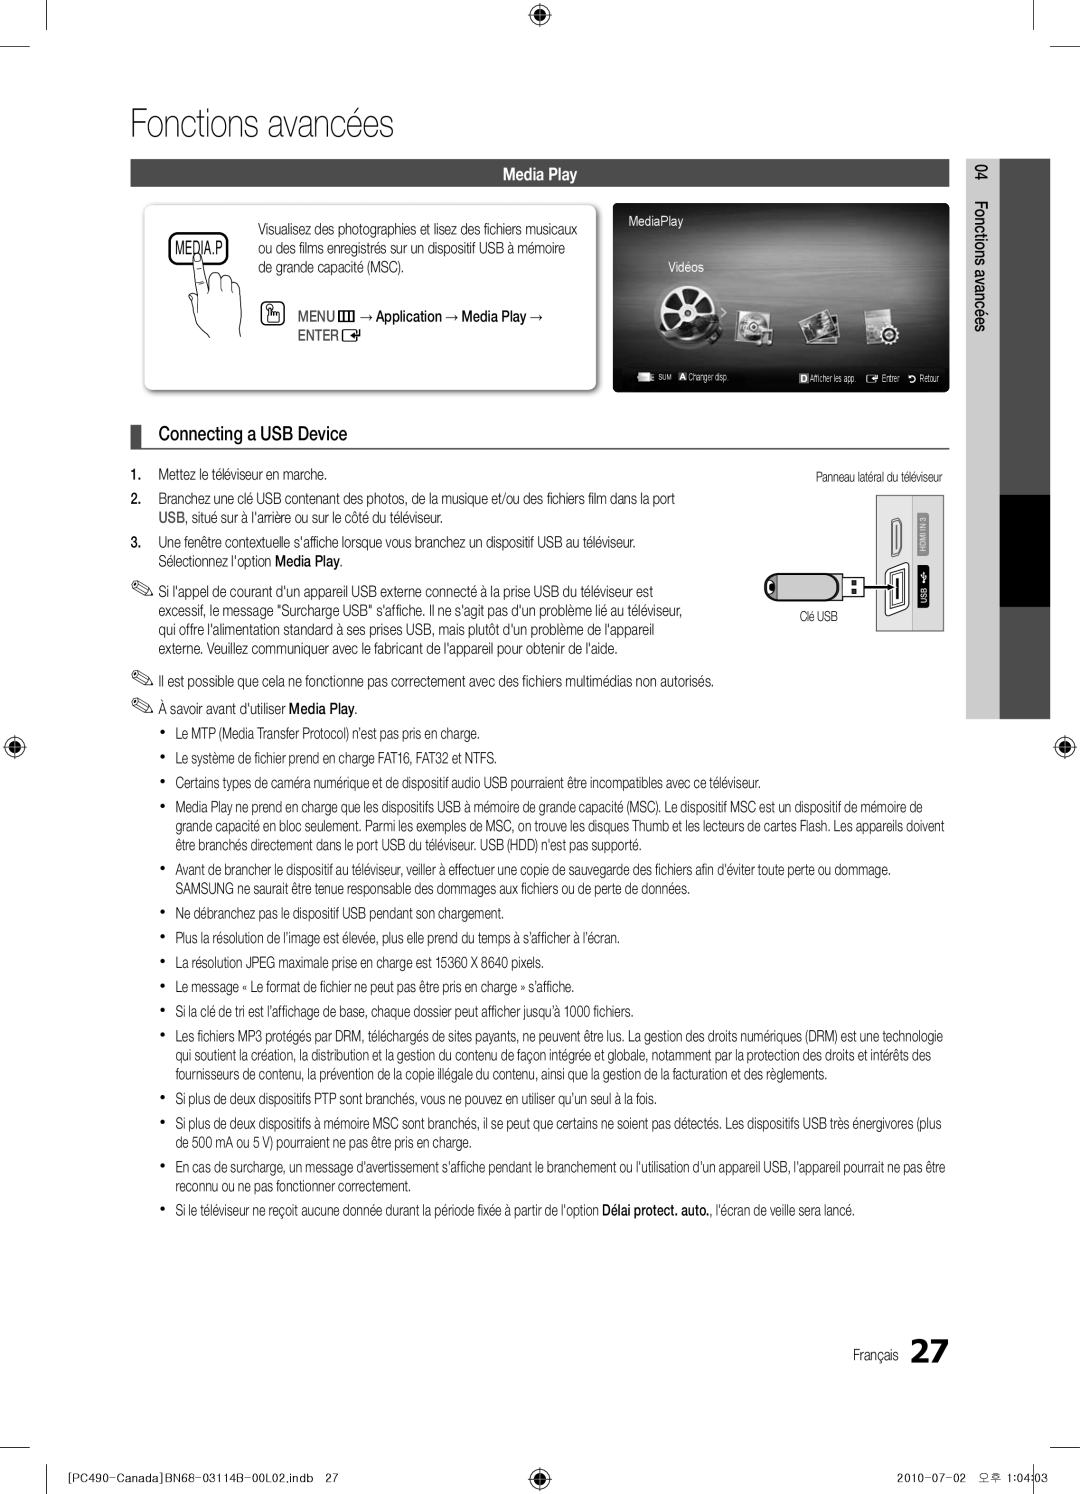 Samsung PN50C490, BN68-03114B-01, Series P4+ 490 user manual Fonctions avancées, Connecting a USB Device, Media Play, Entere 